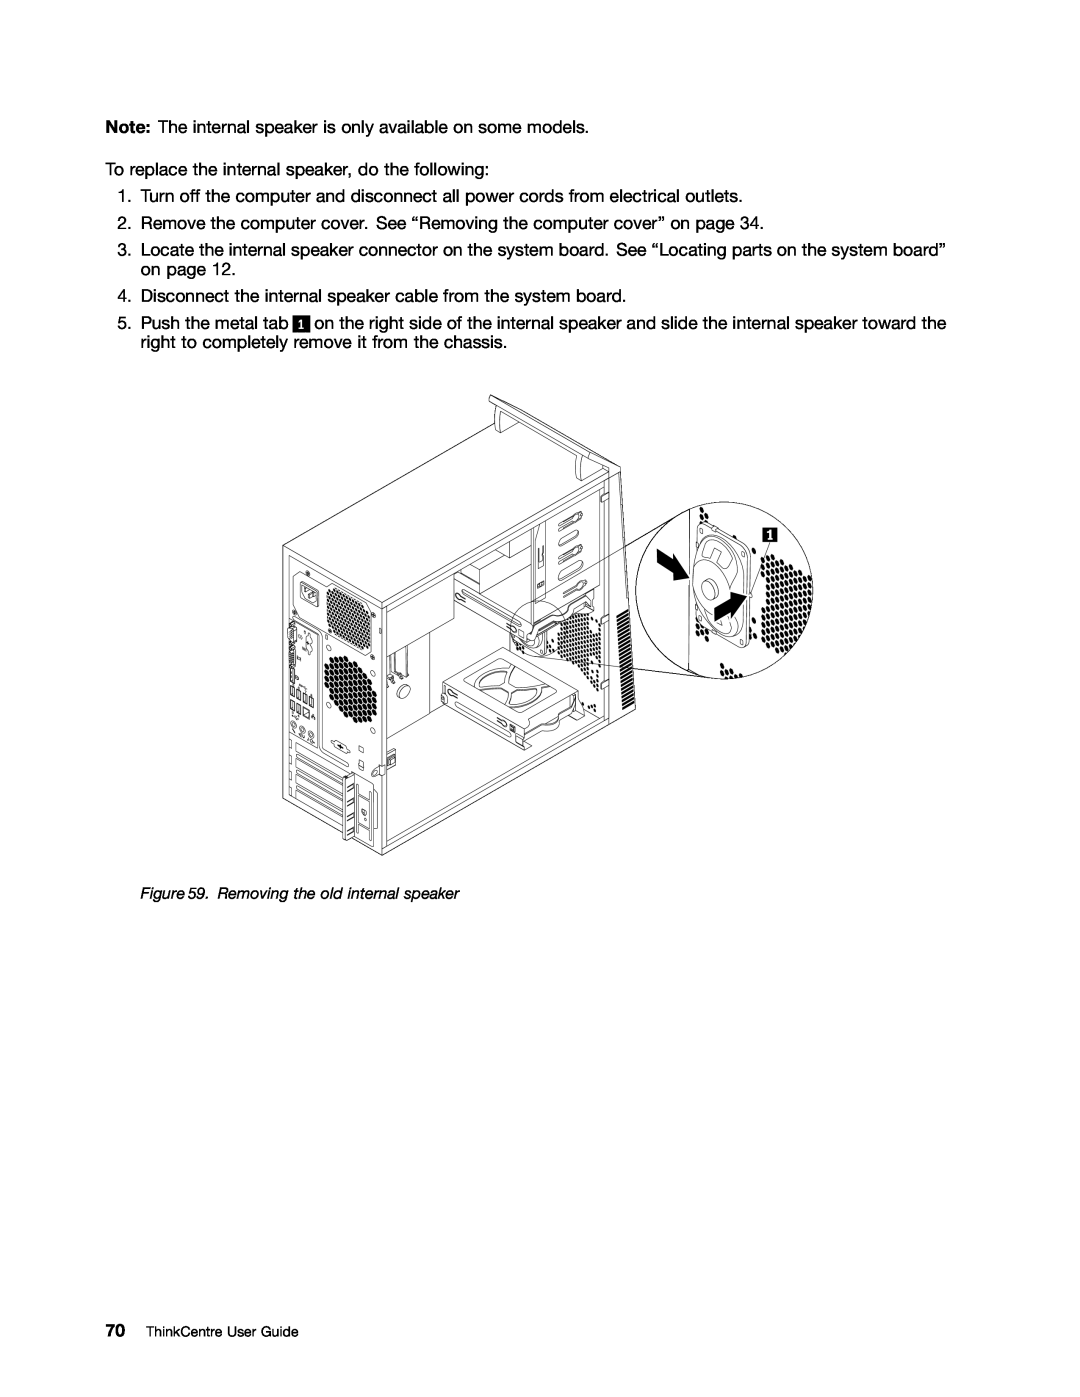 Lenovo 2756D7U, 2697 manual Removing the old internal speaker, ThinkCentre User Guide 